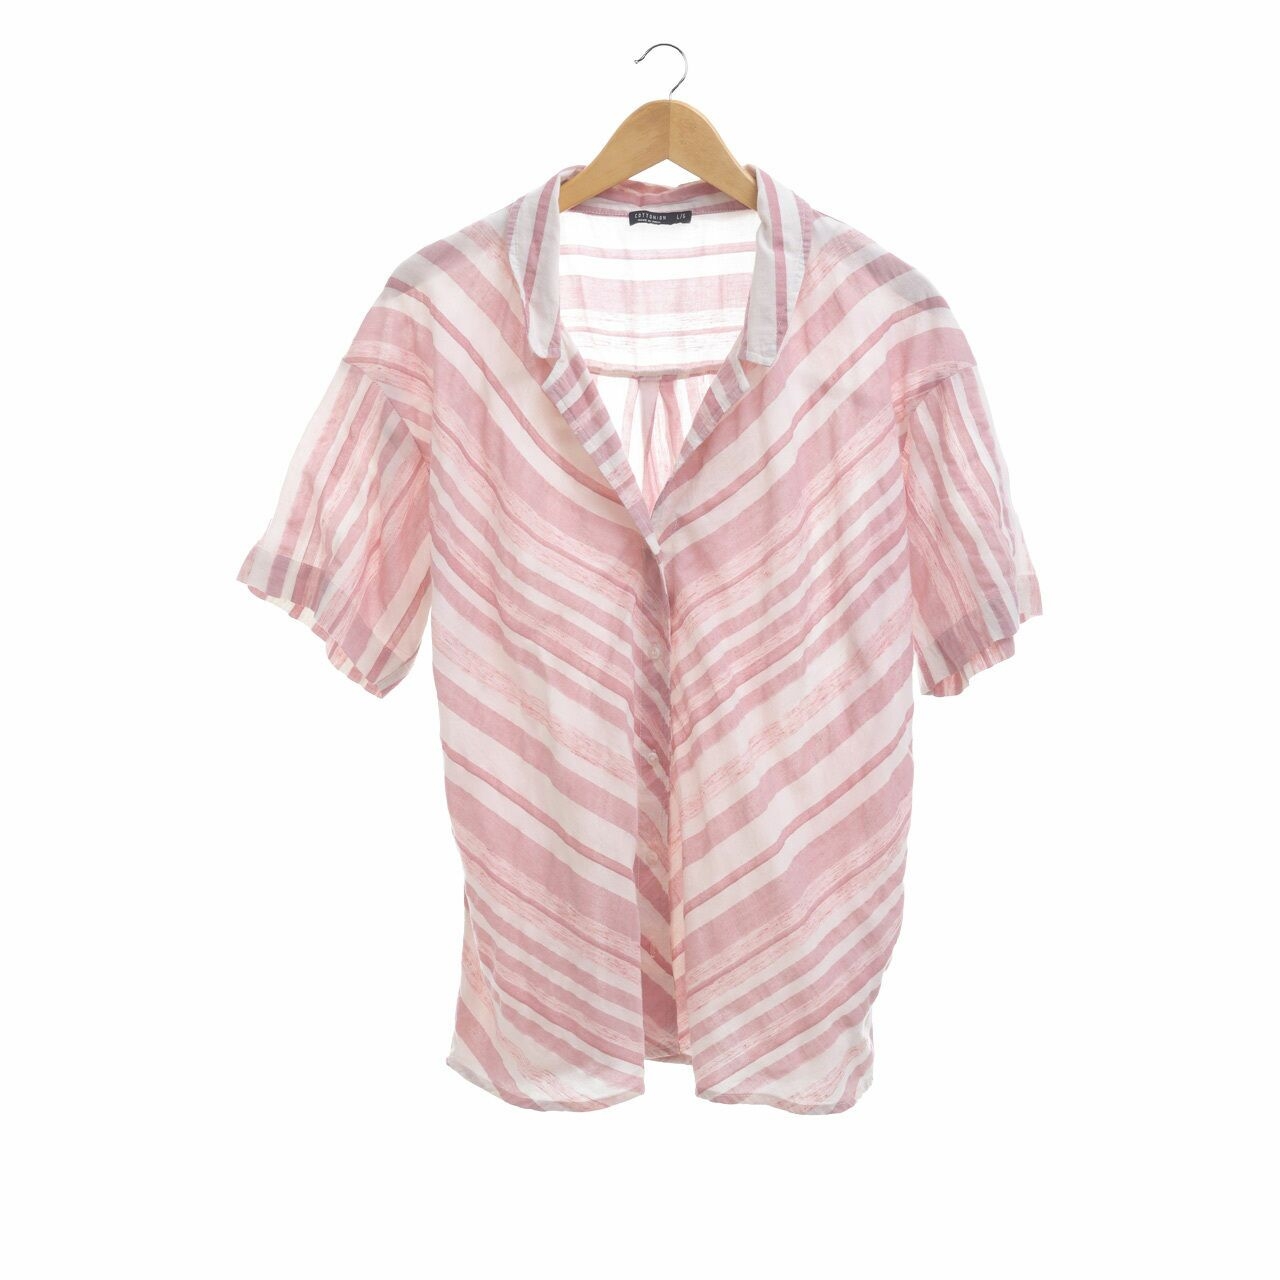 Cotton On Pink & Off White Striped Shirt